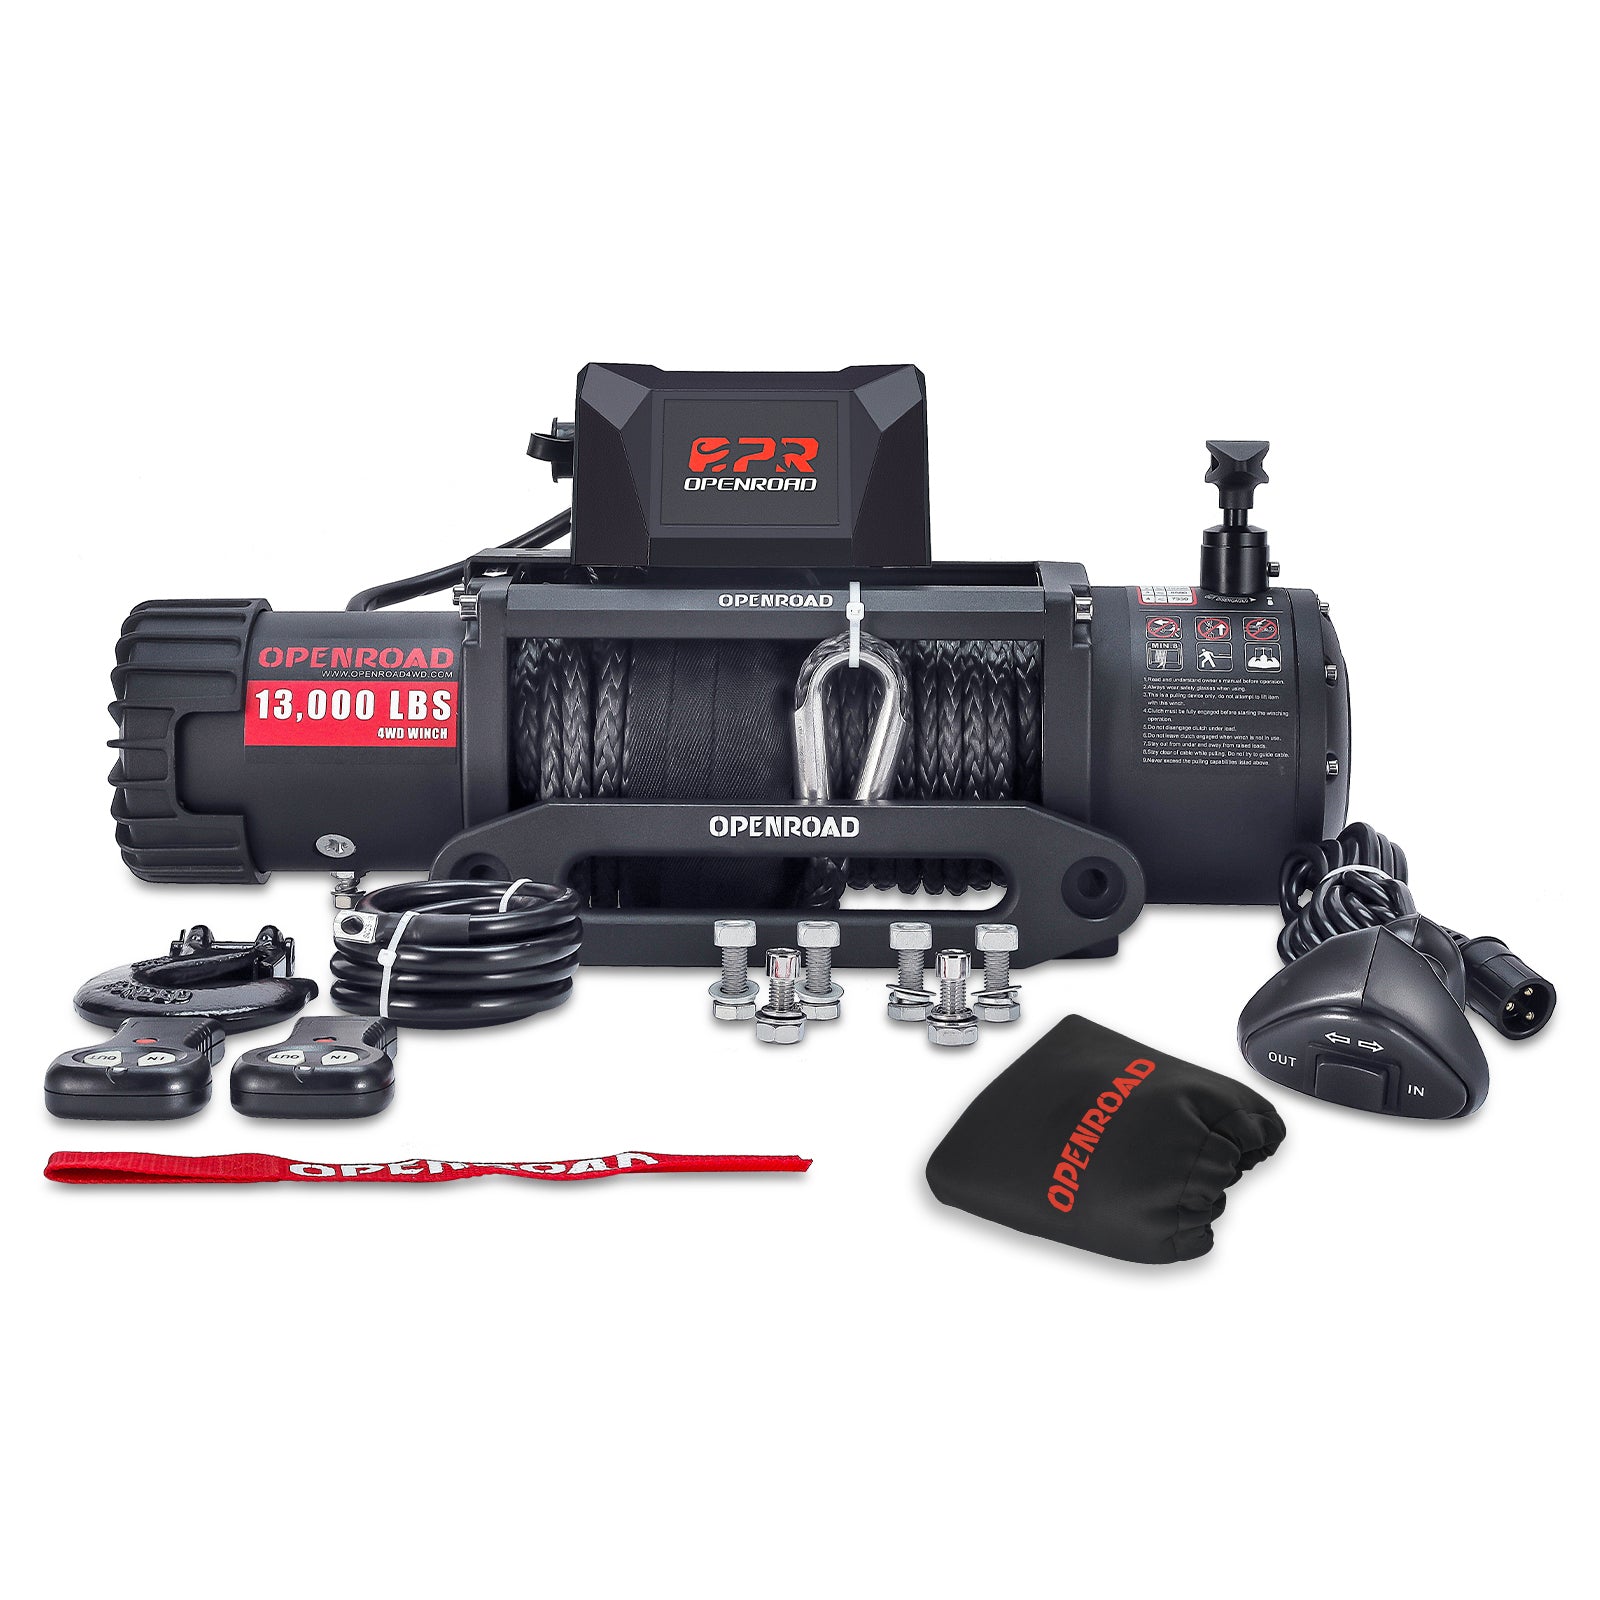 OPENROAD 13,000 lbs winch with synthetic rope and 2 wireless remote controllers - Panther Series 2S  openroad4wd.com   